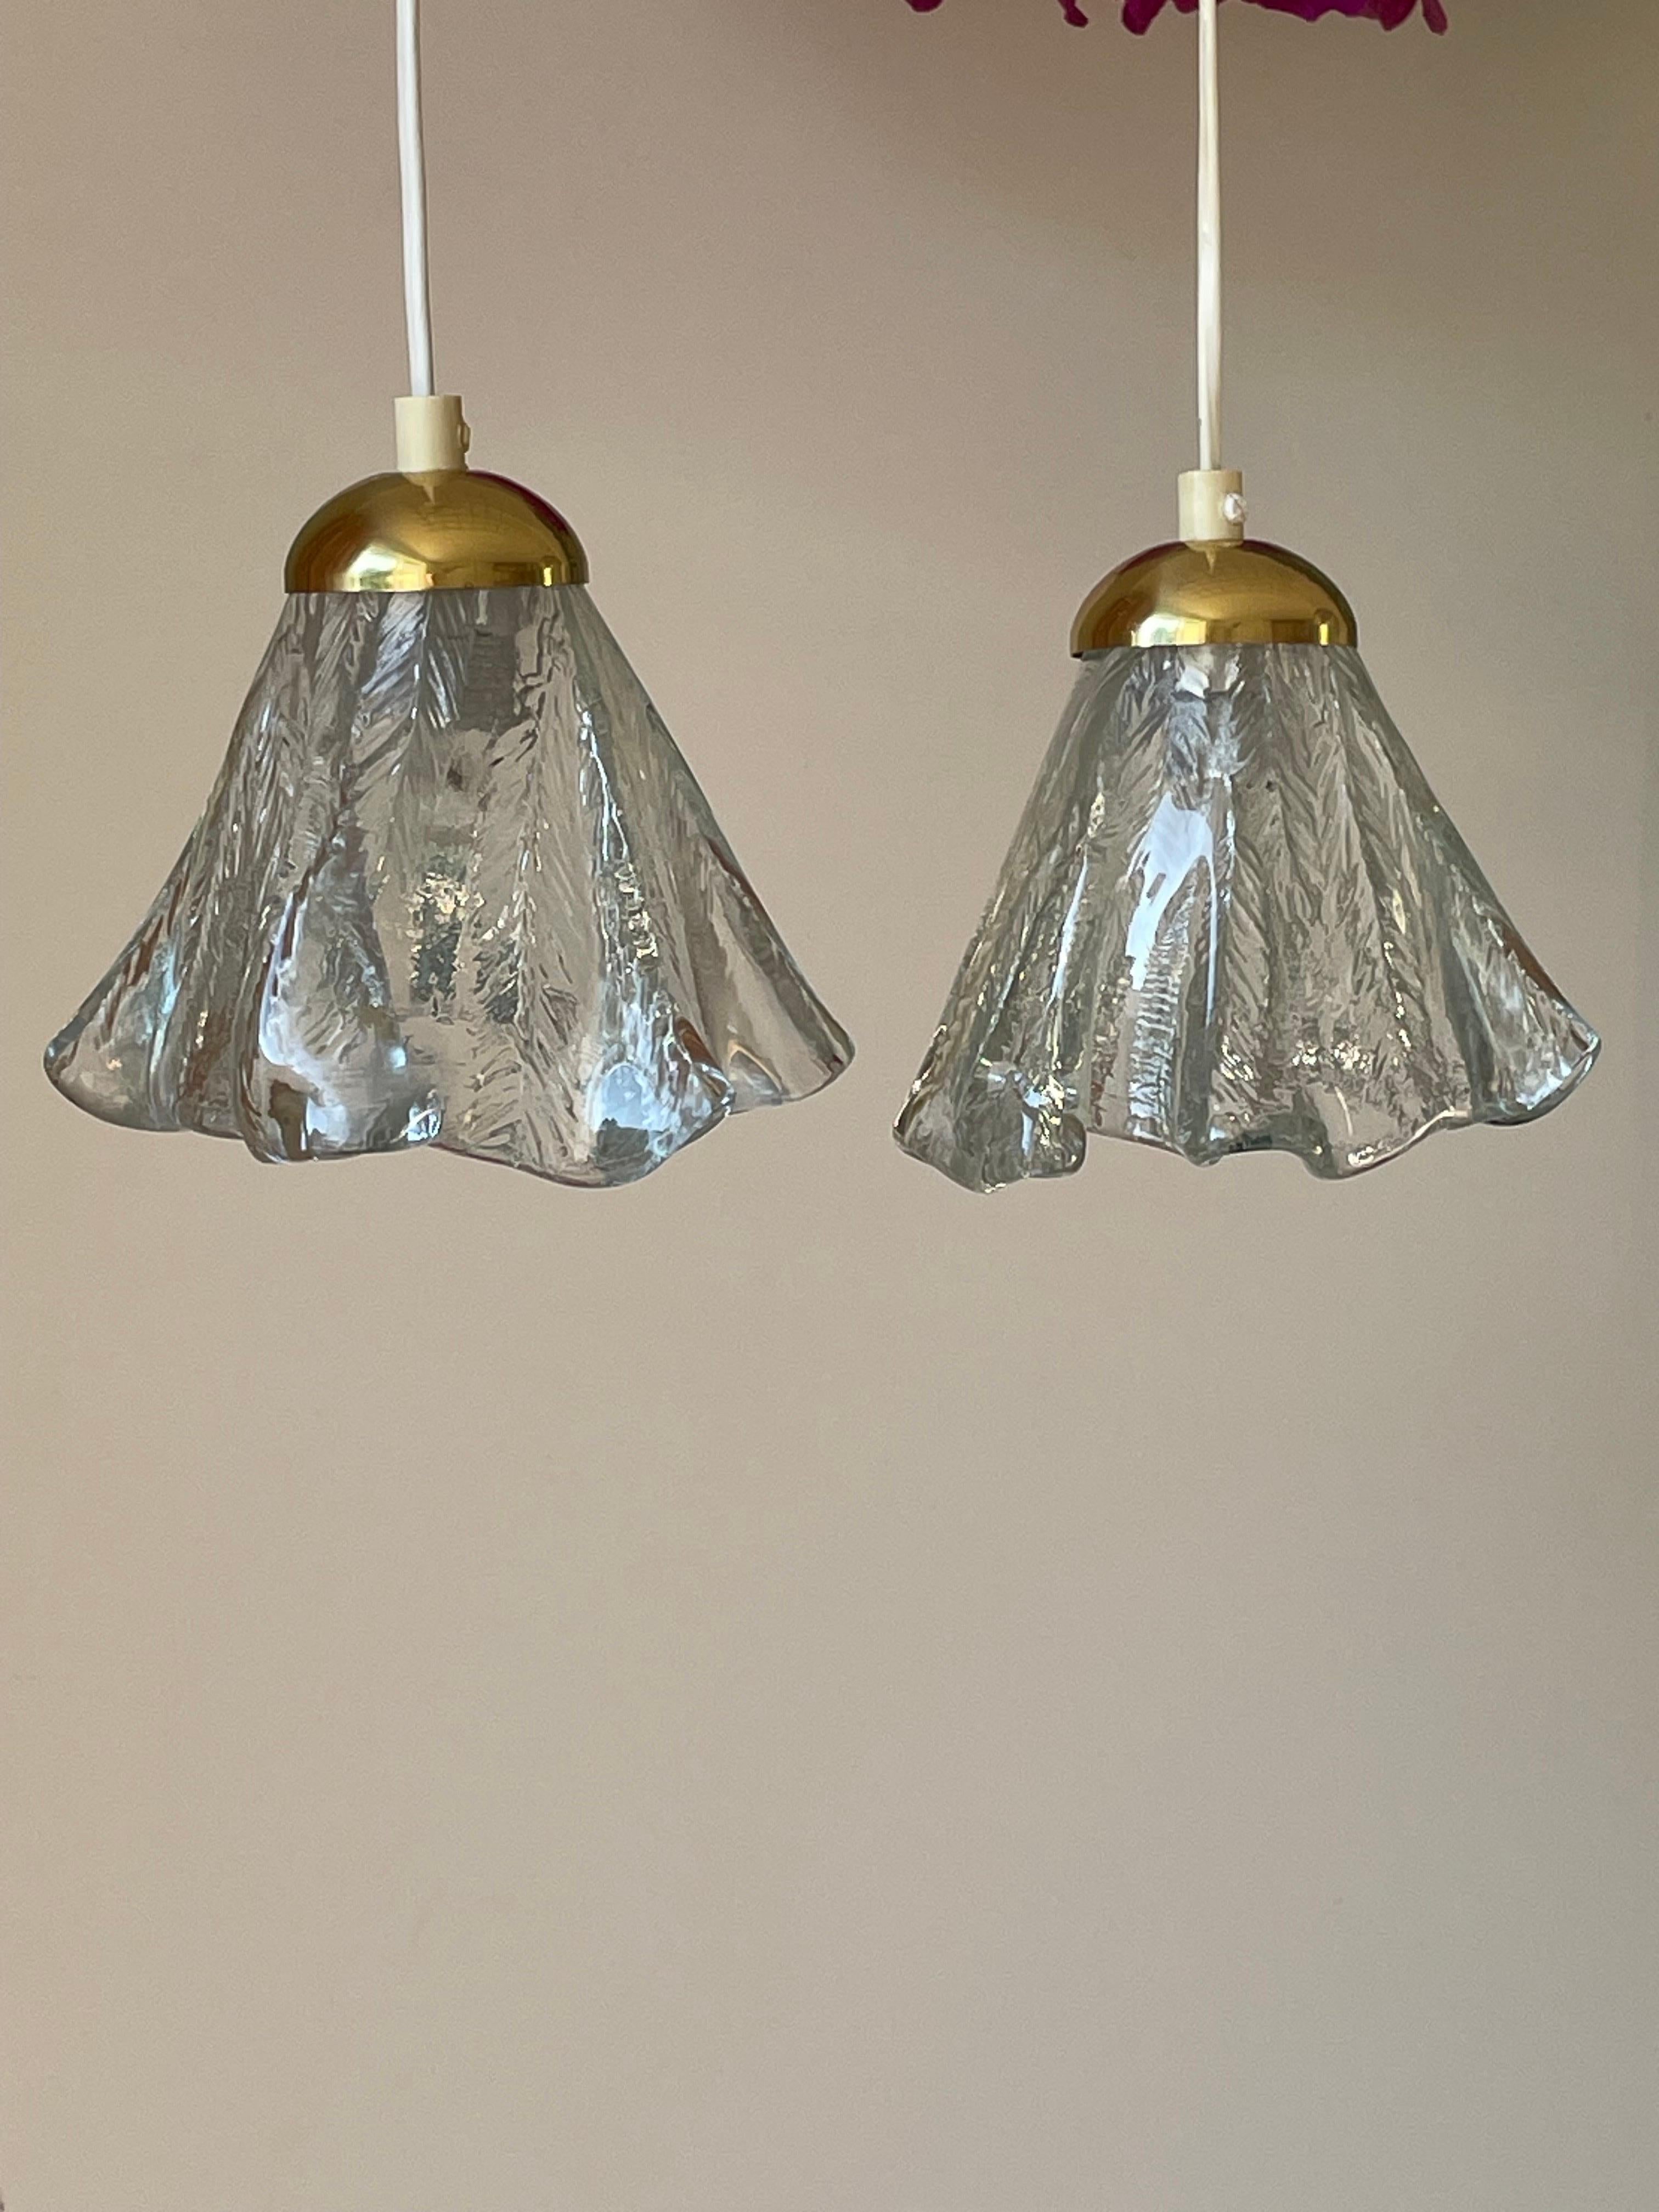 Hand-Crafted Orrefors Draped Art Glass Pendants on Brass Mount, Sweden, 1960s For Sale